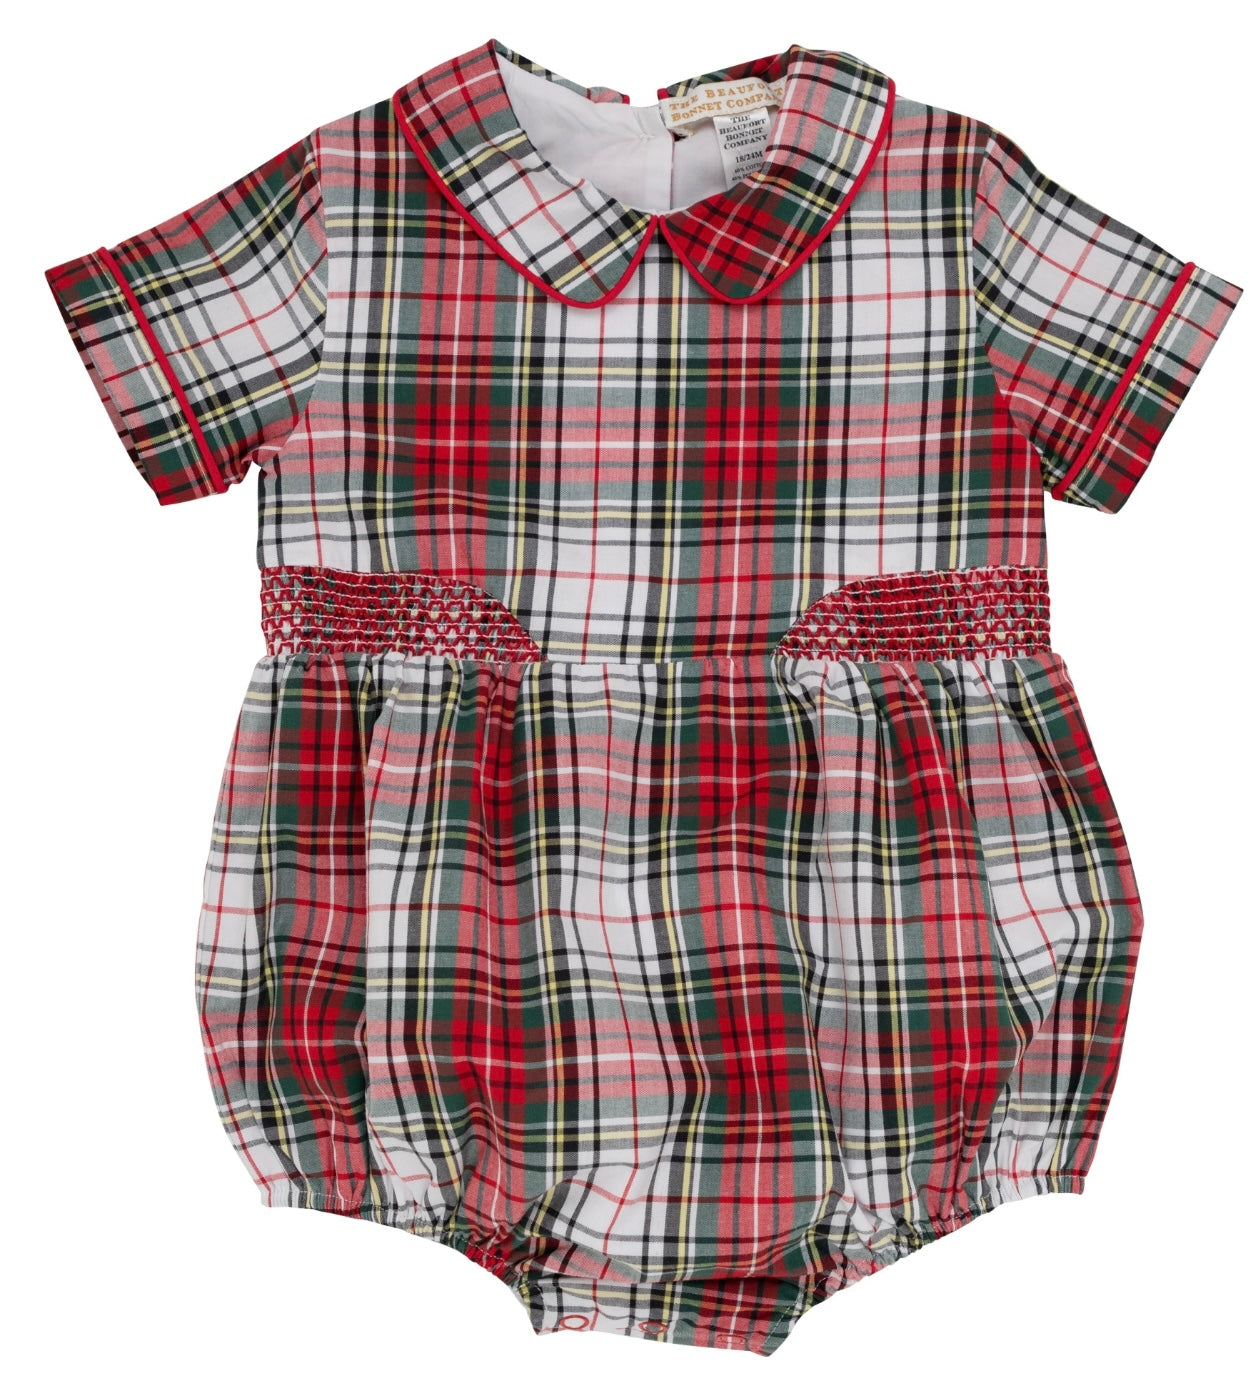 Brently Bubble-Keene Place Plaid